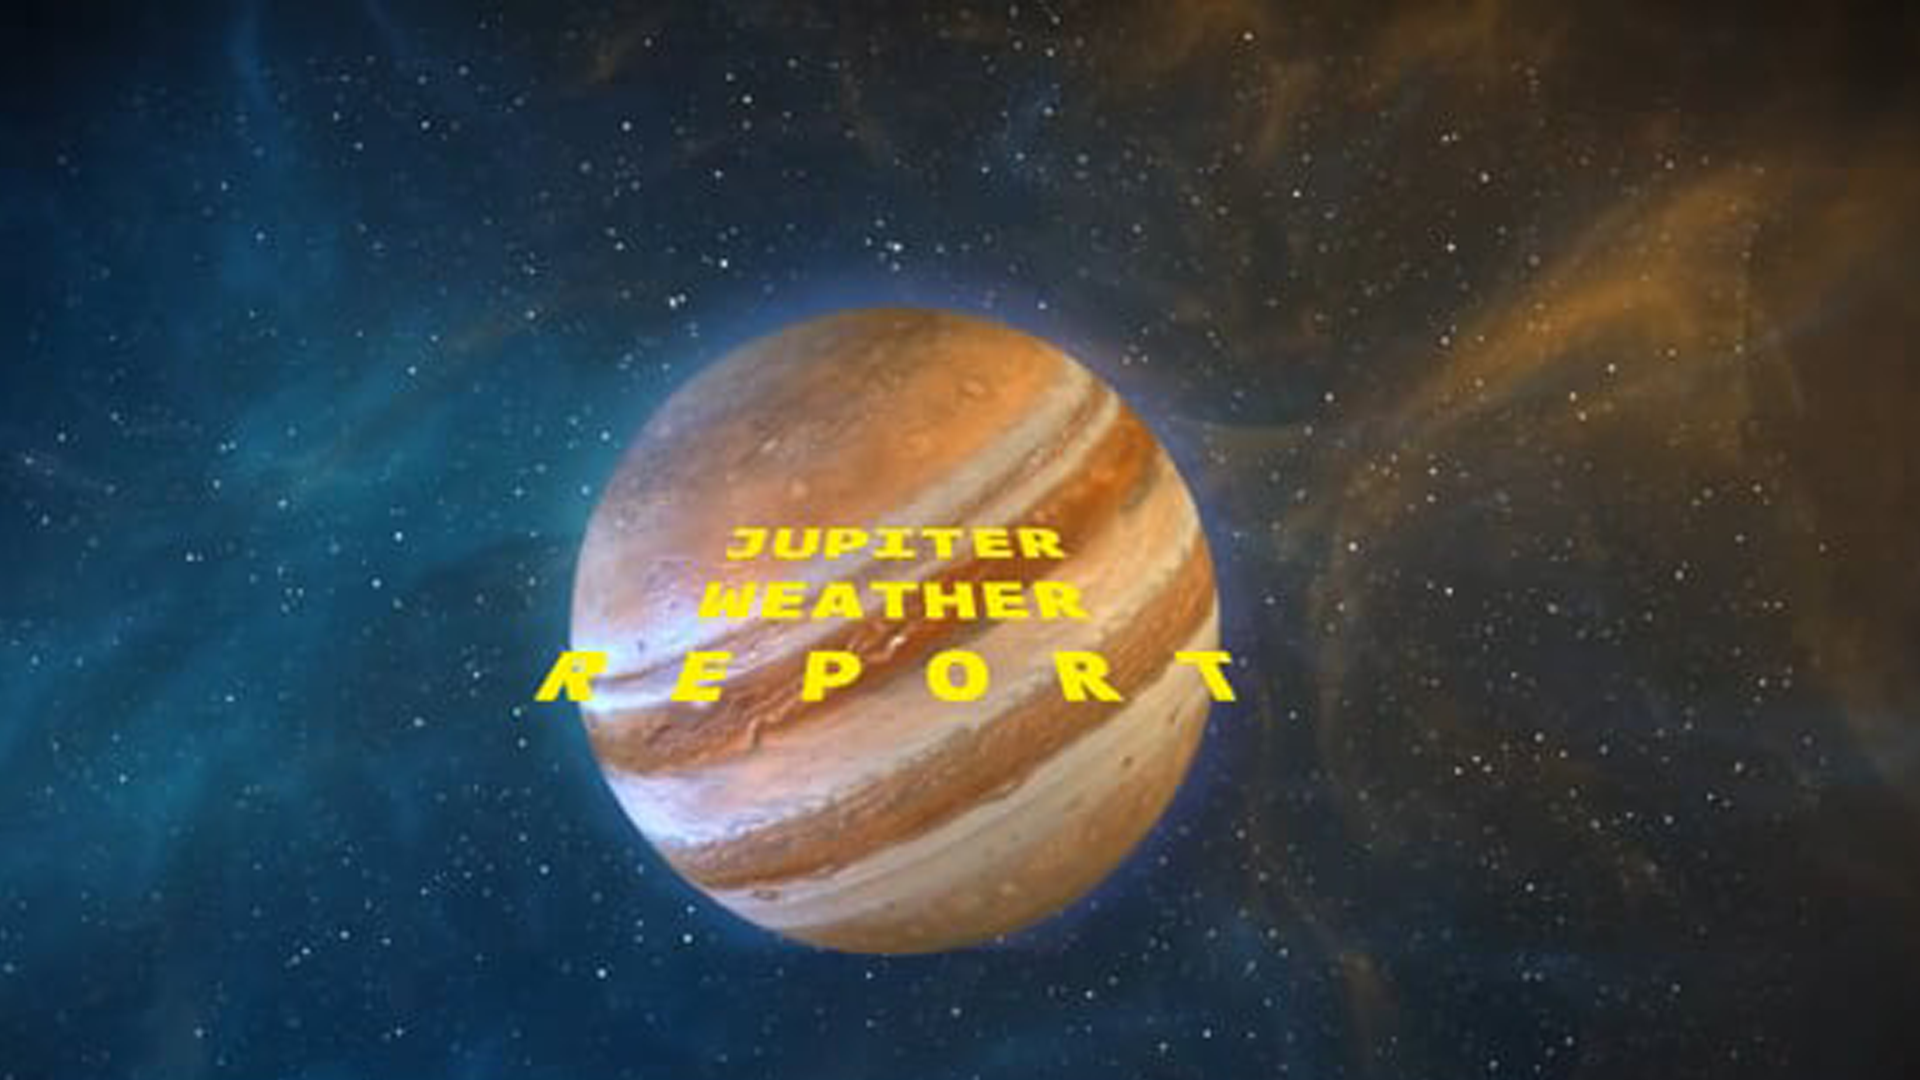 Weather Report from Jupiter